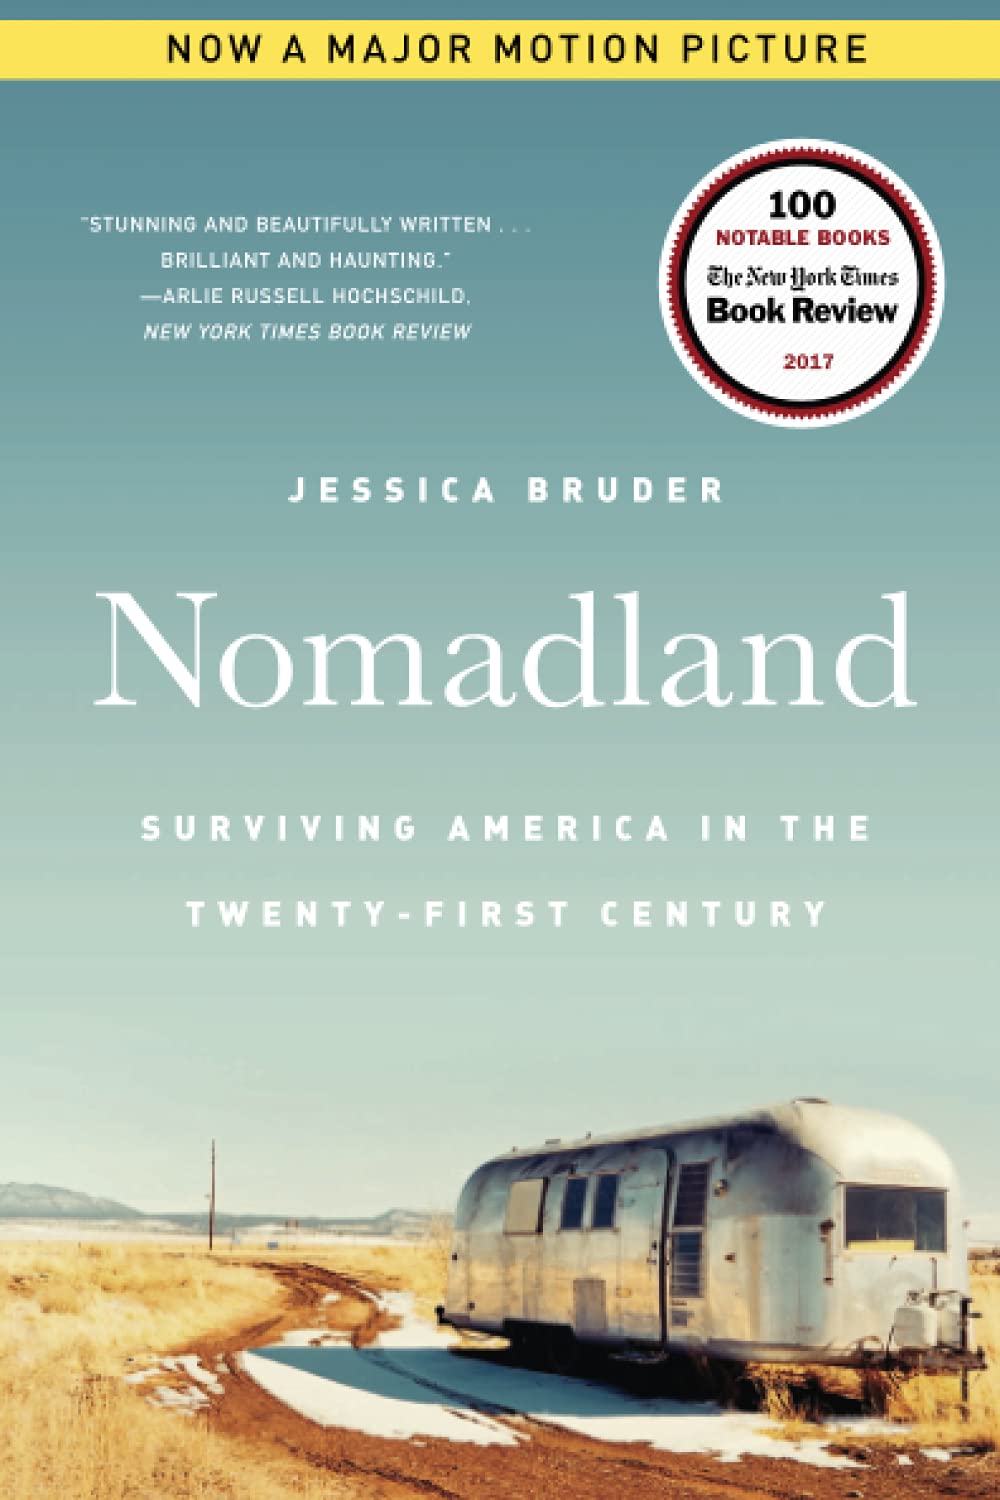 Image for "Nomadland: Surviving America in the Twenty-First Century"